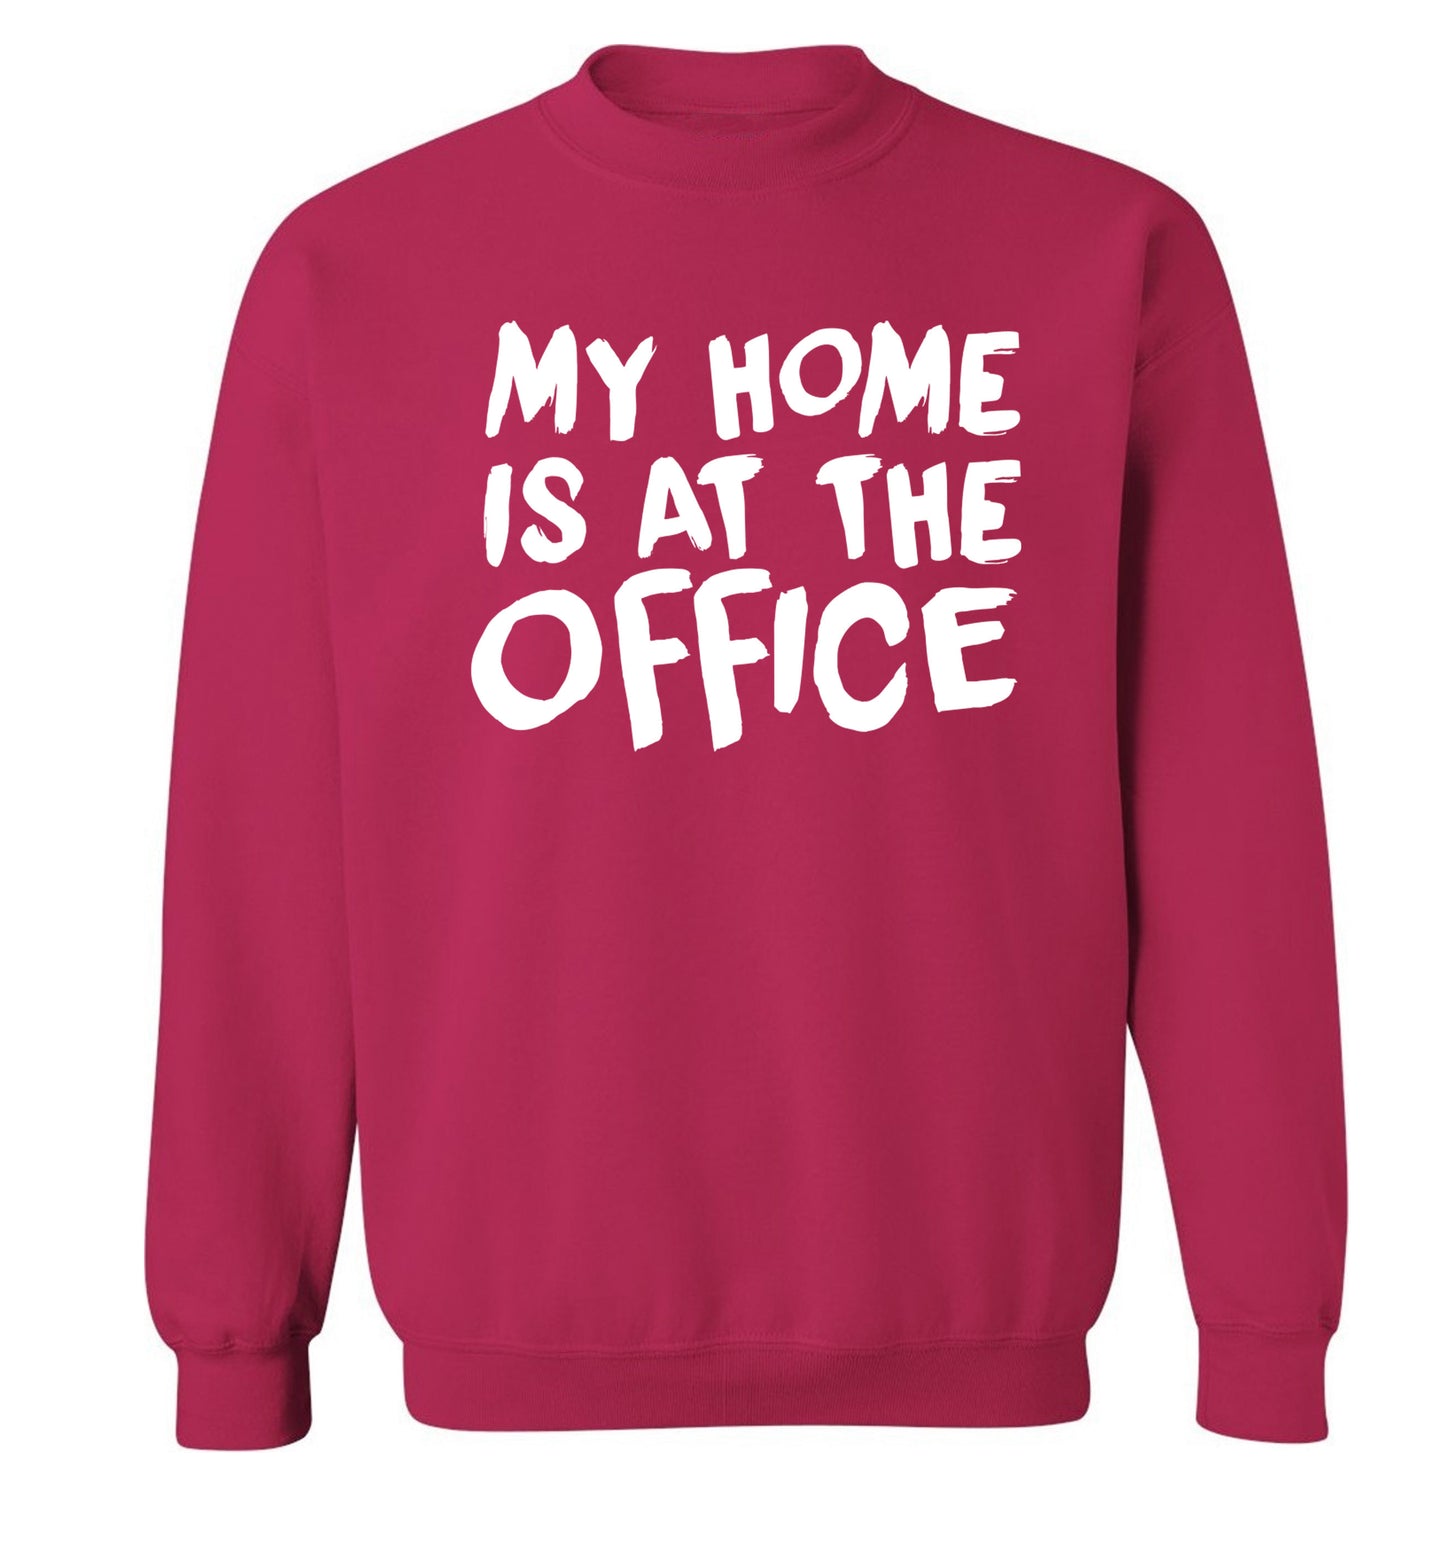 My home is at the office Adult's unisex pink Sweater 2XL